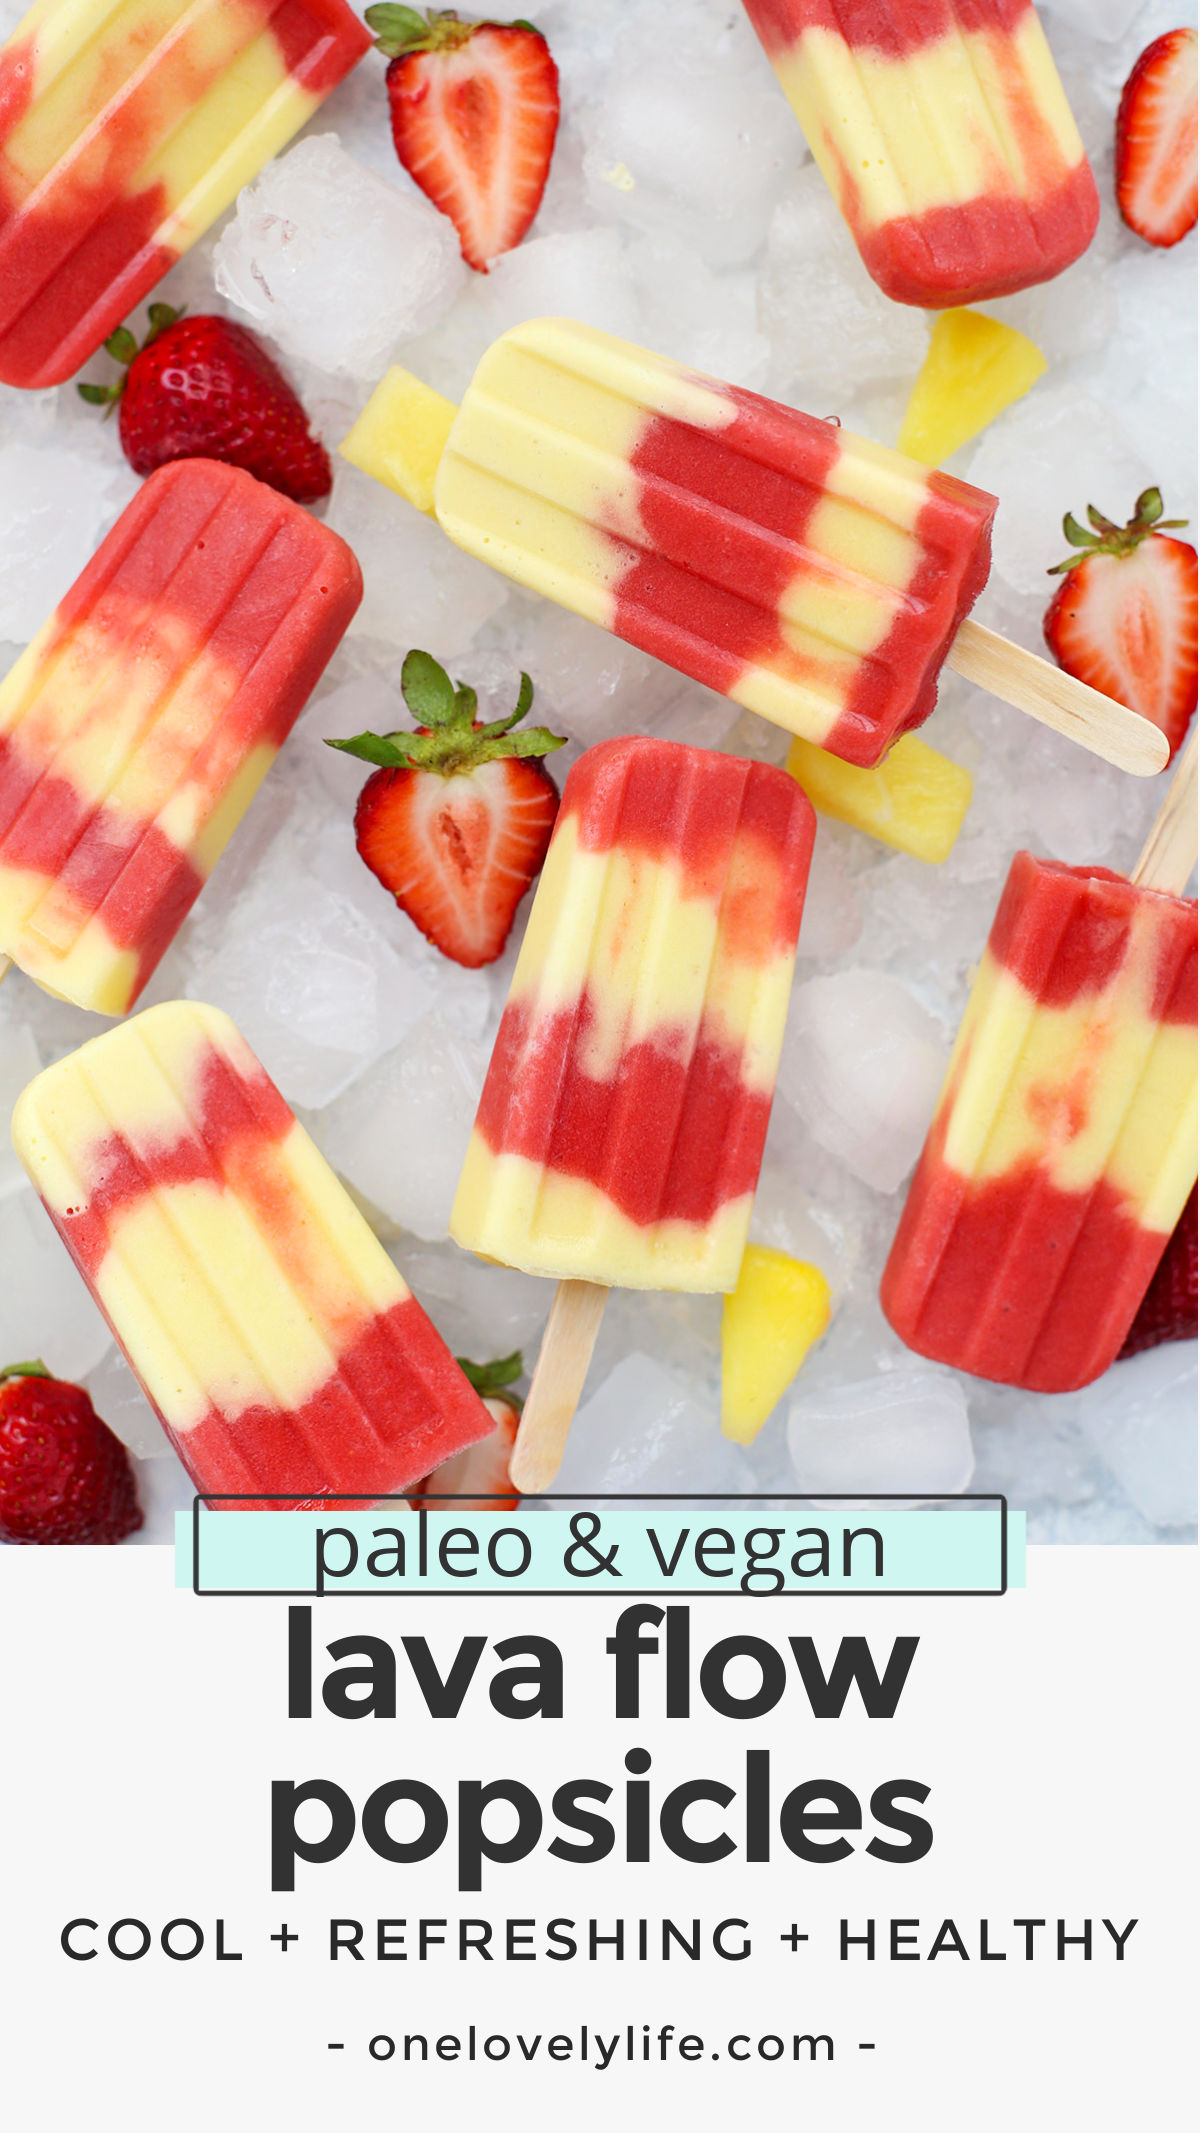 Lava Flow Popsicles - Creamy coconut pineapple swirled with fresh strawberry. Paleo, Vegan, and naturally sweetened! // Strawberry Pineapple Popsicles // Virgin Lava Flow Popsicles // fresh fruit popsicles // healthy popsicles // pineapple coconut popsicles // pina colada popsicles // homemade popsicle recipe // pineapple strawberry popsicles //